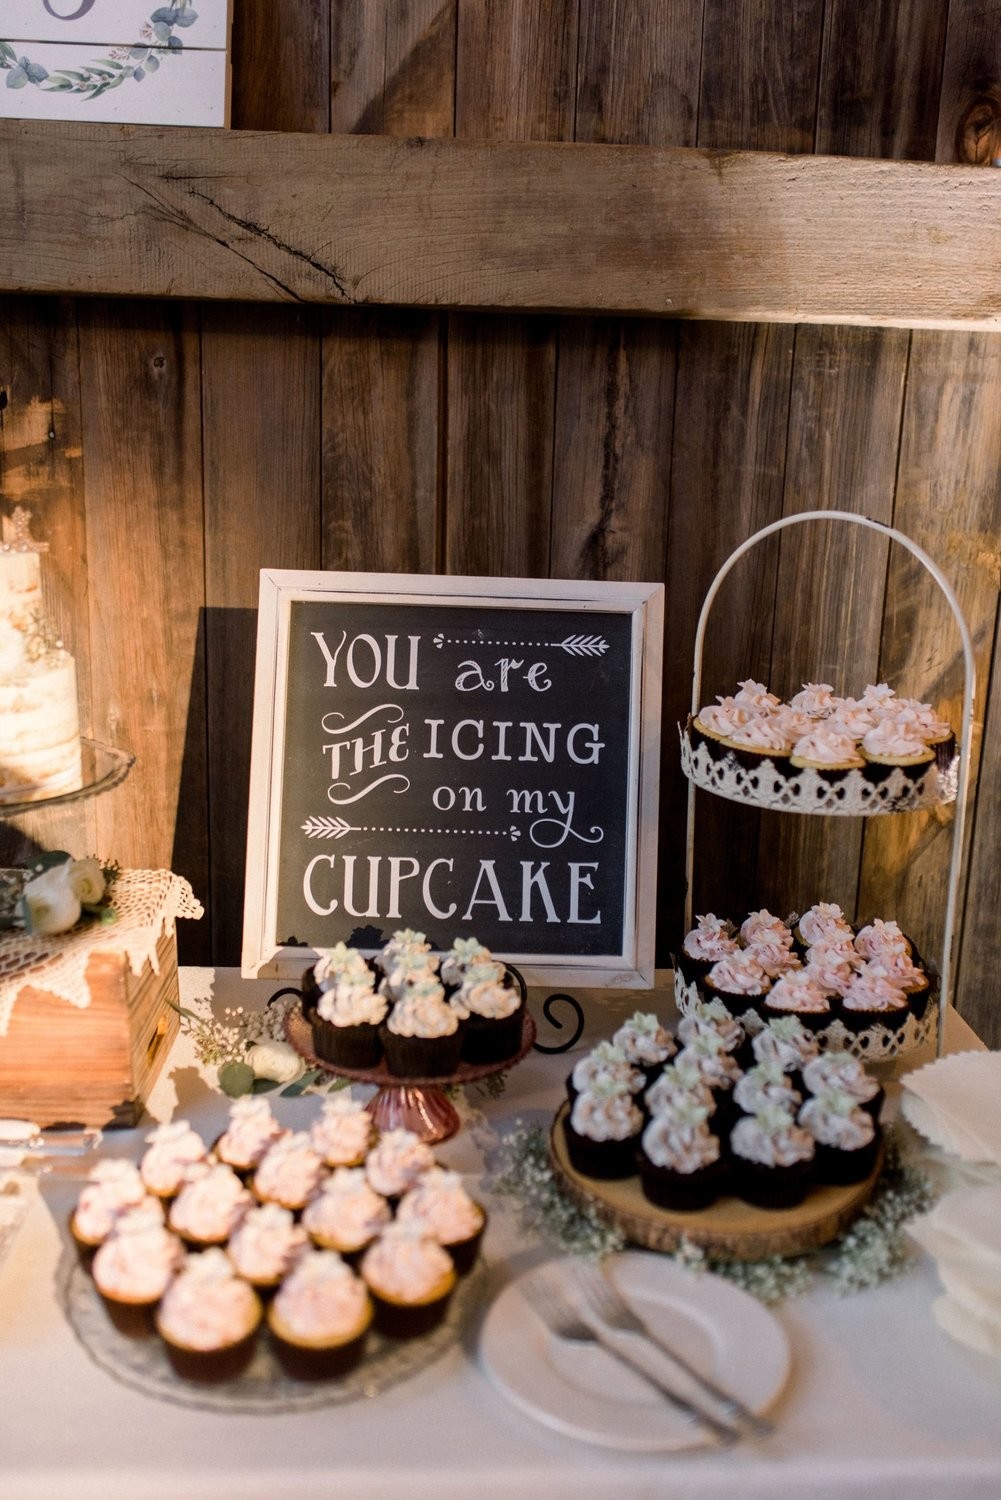 Chalkboard Sign "You Are the Icing on My Cupcake"